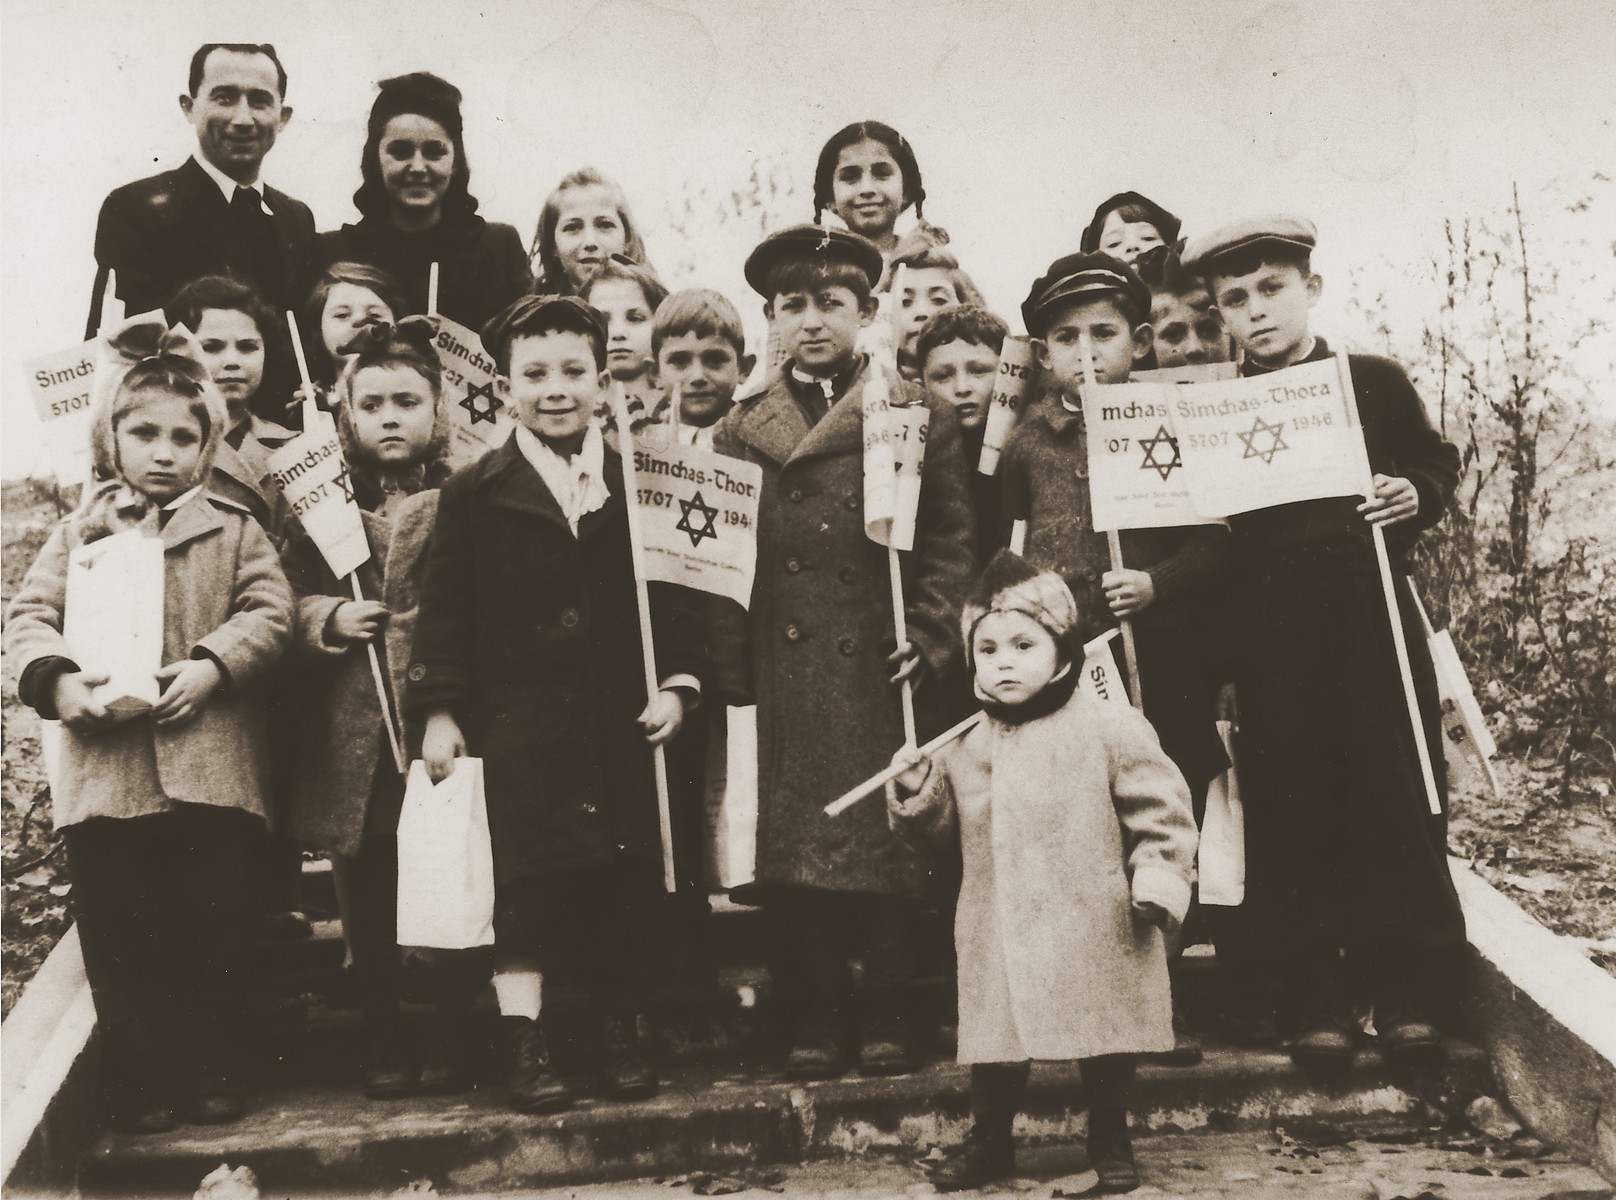 Group portrait of children holding toy flags for Simchat Torah at the Schlachtensee displaced persons camp.

Among those pictured are Rachel Kosowski (top row, second from the left) and Joseph Shefsky (first row, second from the right).